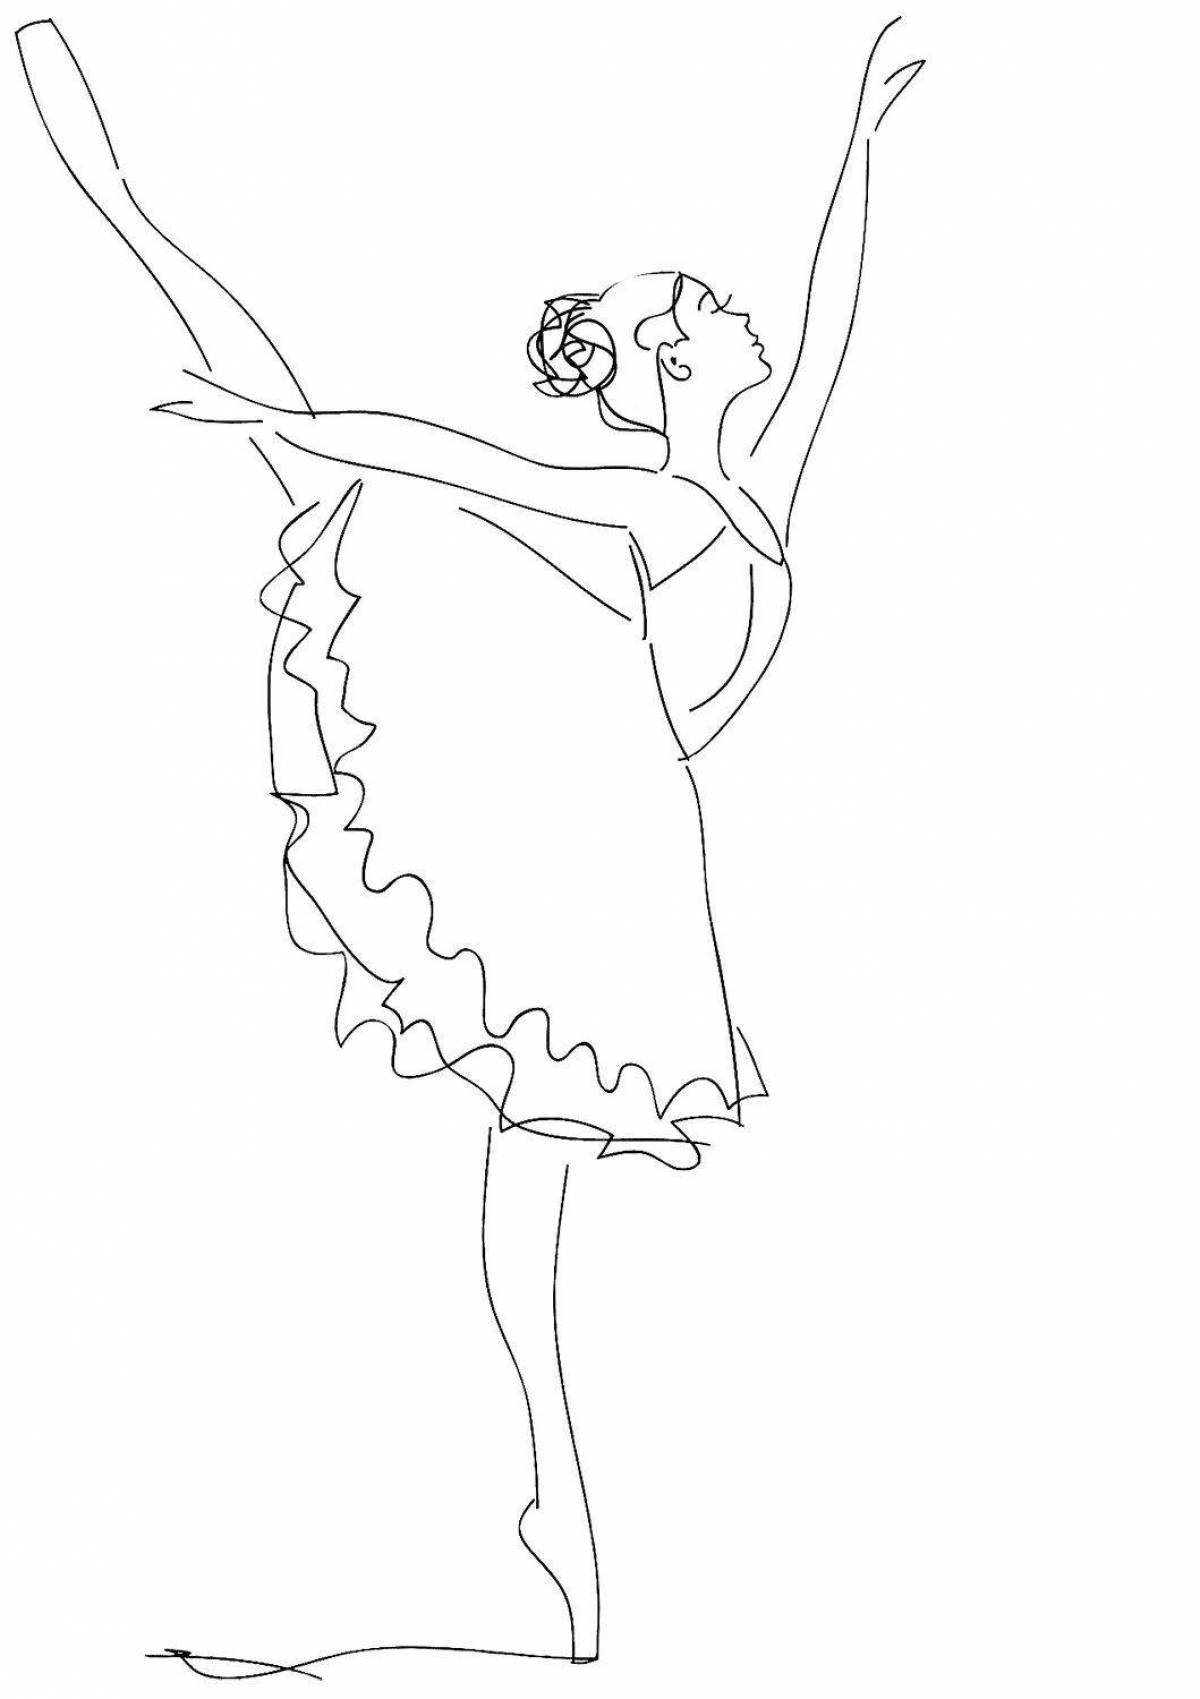 A fascinating drawing of a ballerina